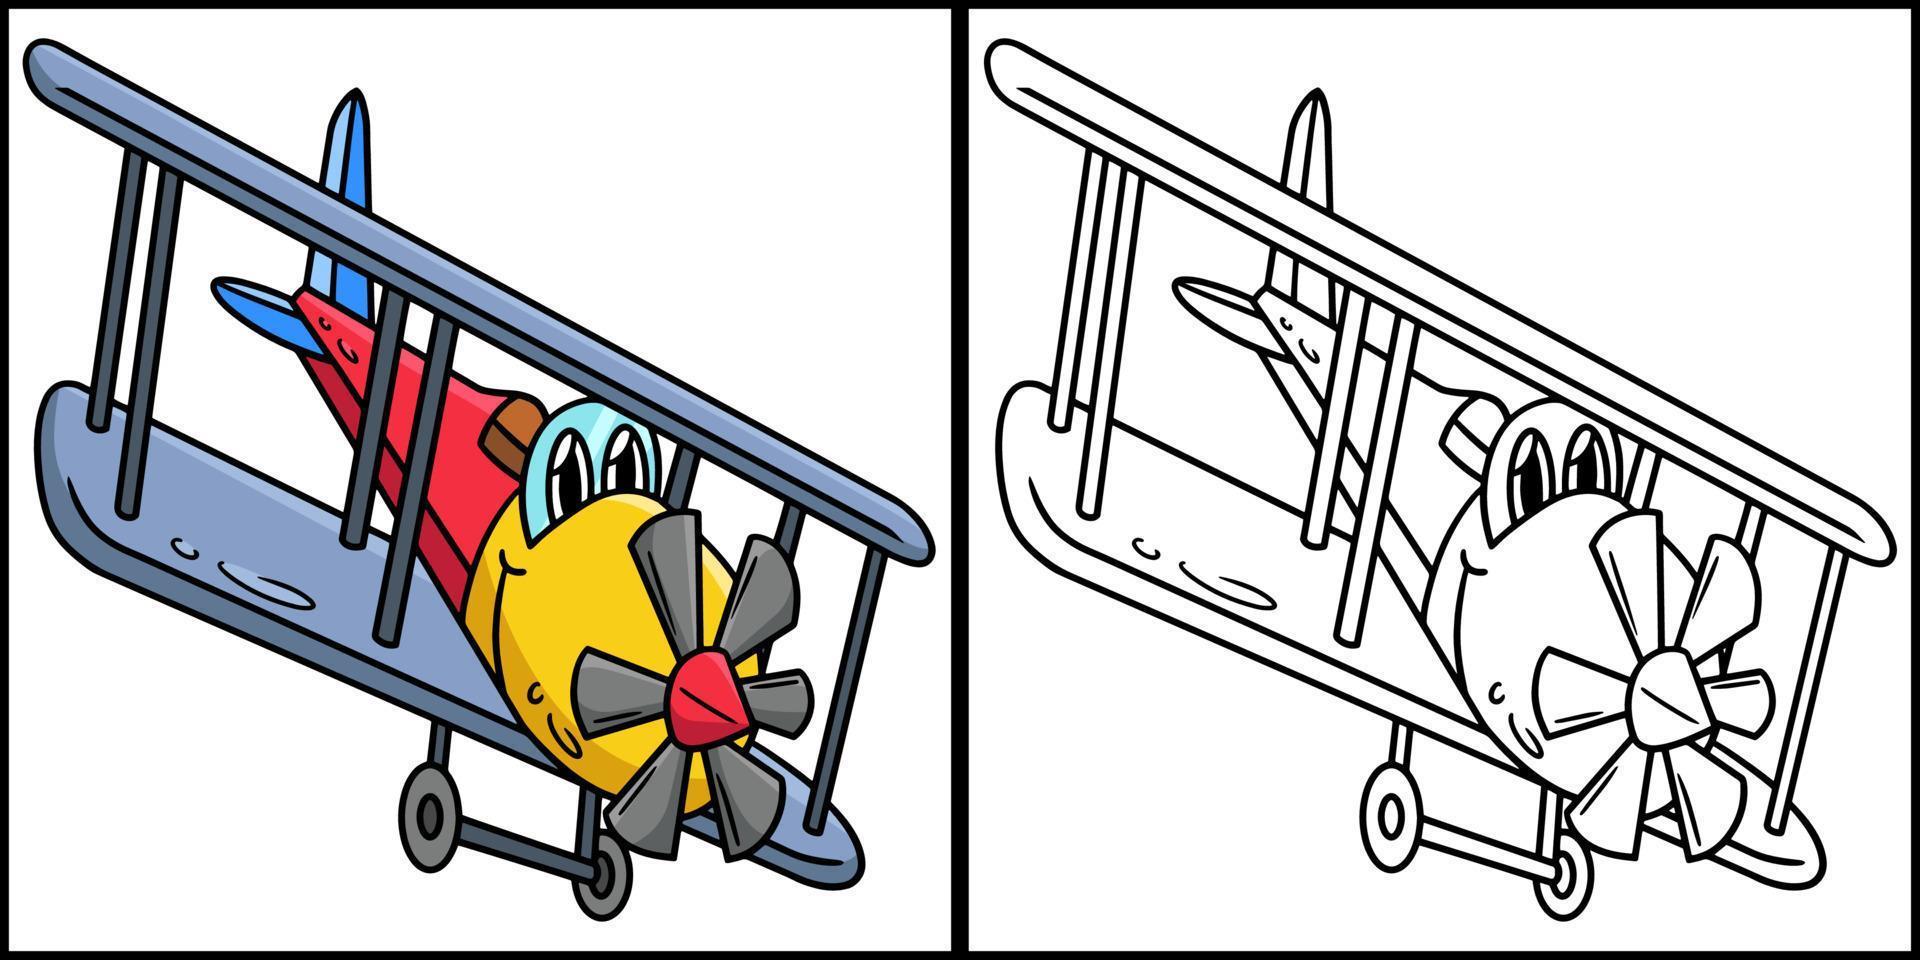 Propeller Plane with Face Vehicle Coloring Page vector